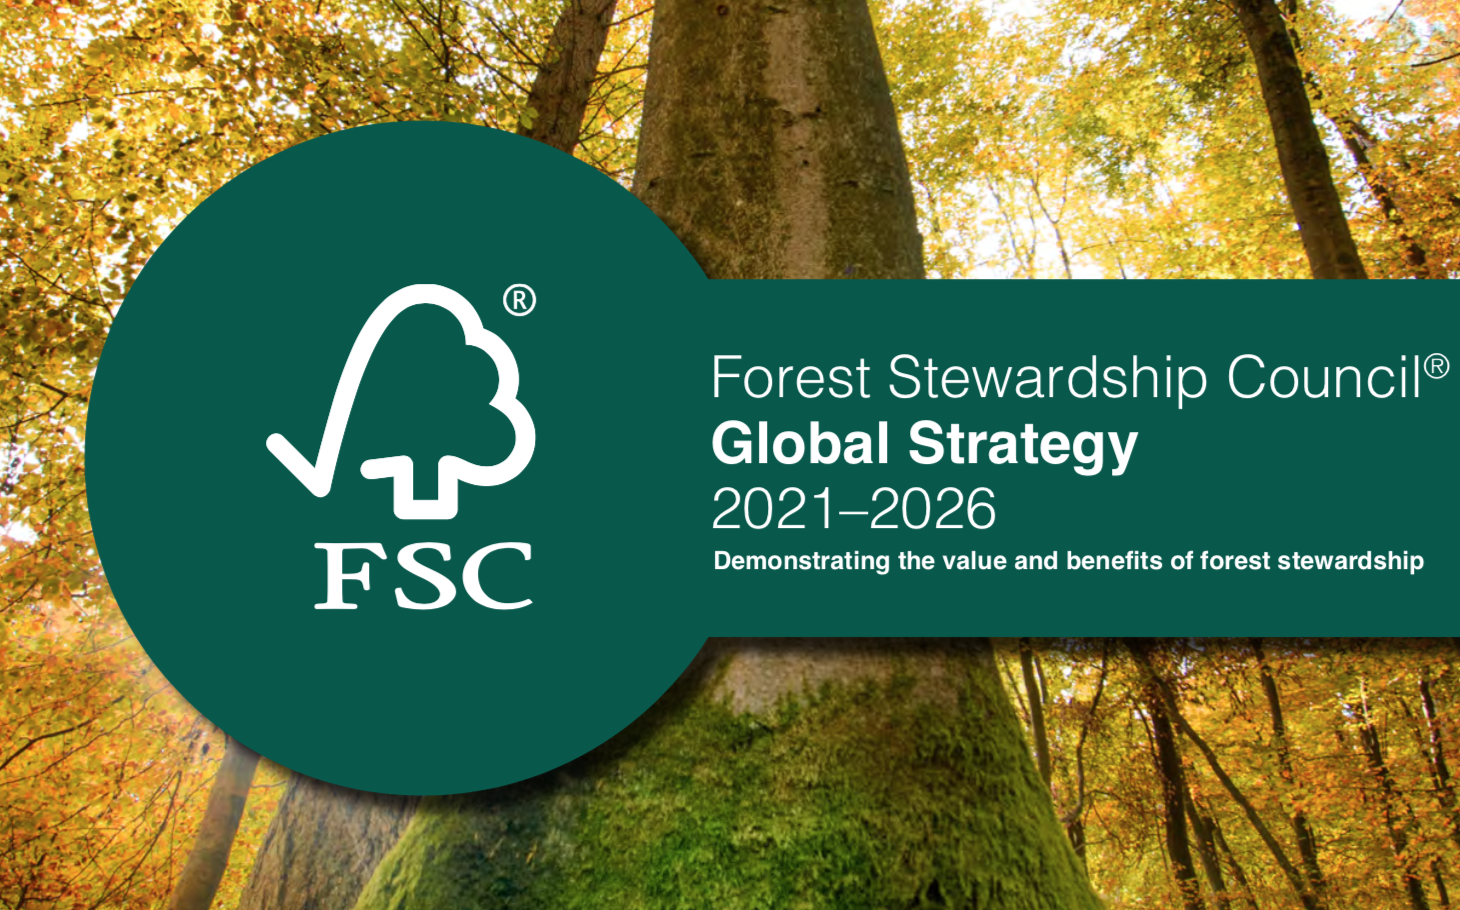 tree behind the text forest stewardship council global strategy 2021-2026